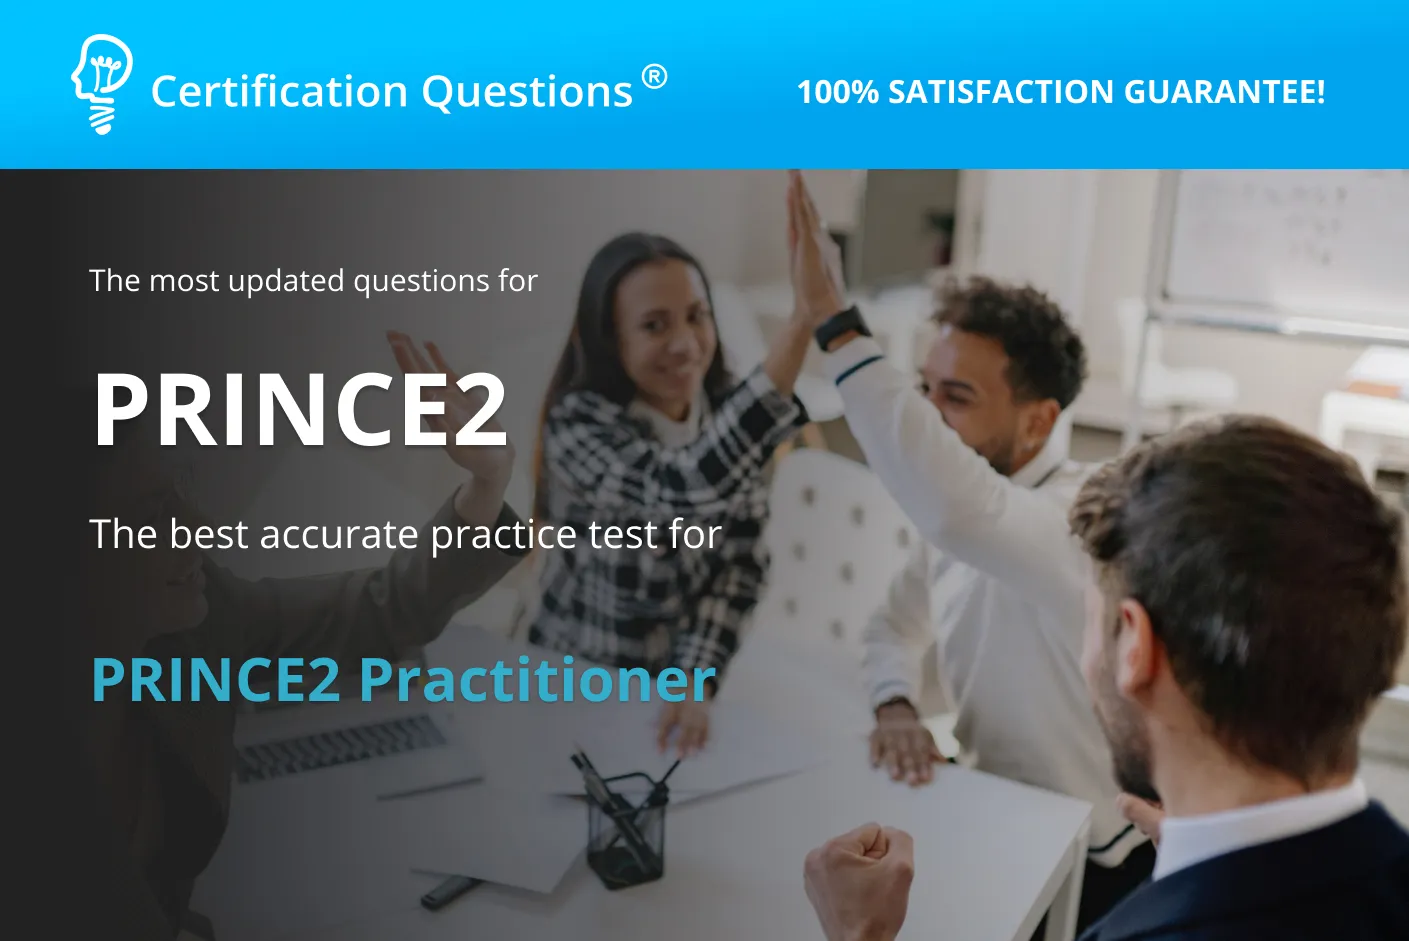 This guide is related to Prince2 practitioner exam questions